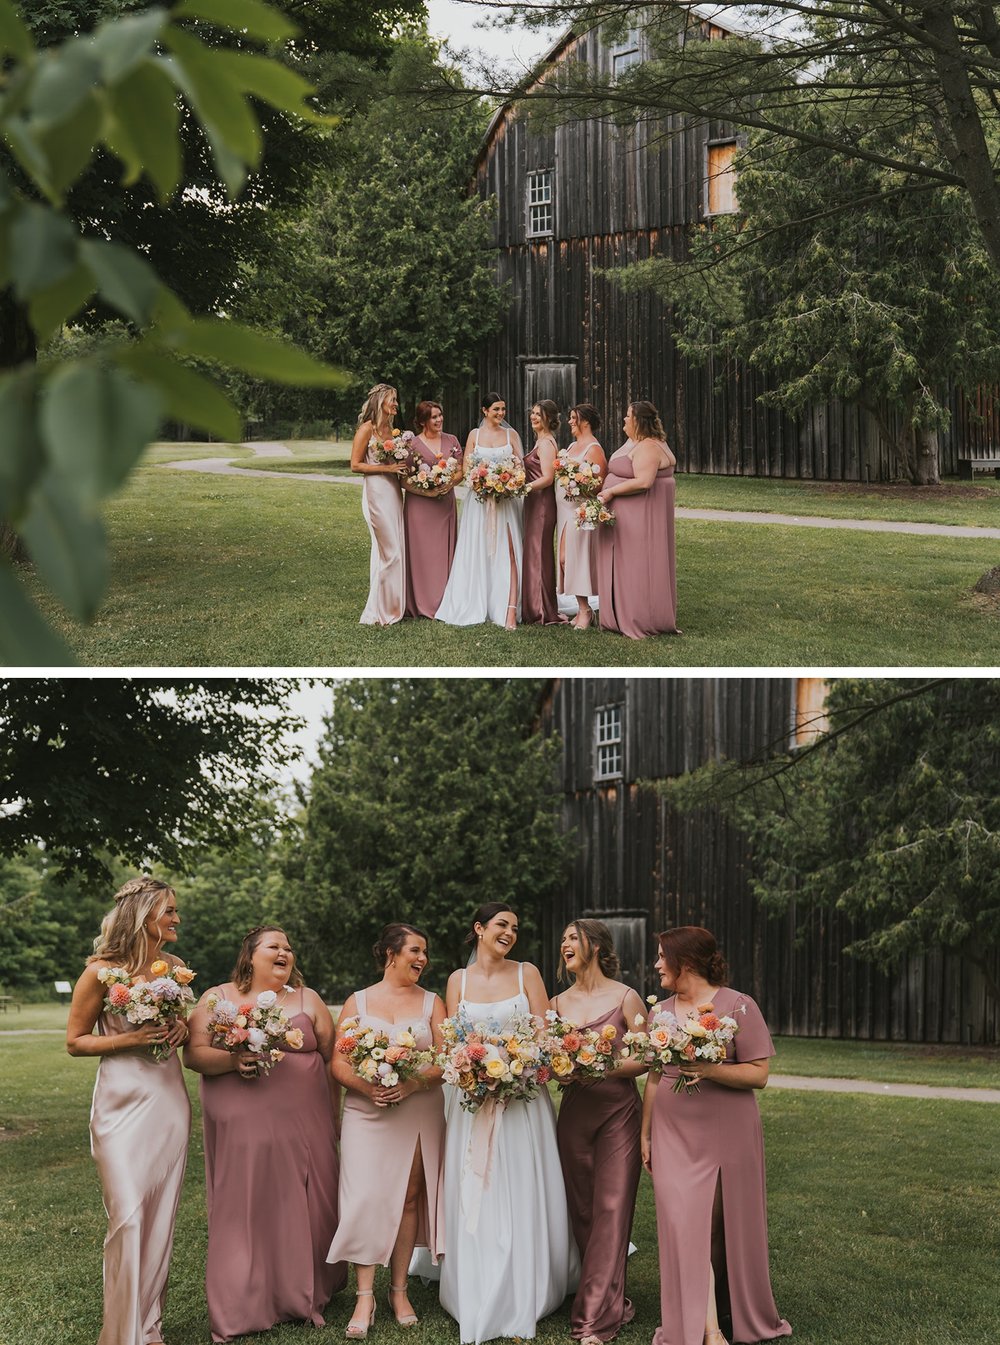 Bridal party portraits at Ball's Falls Conservation Area